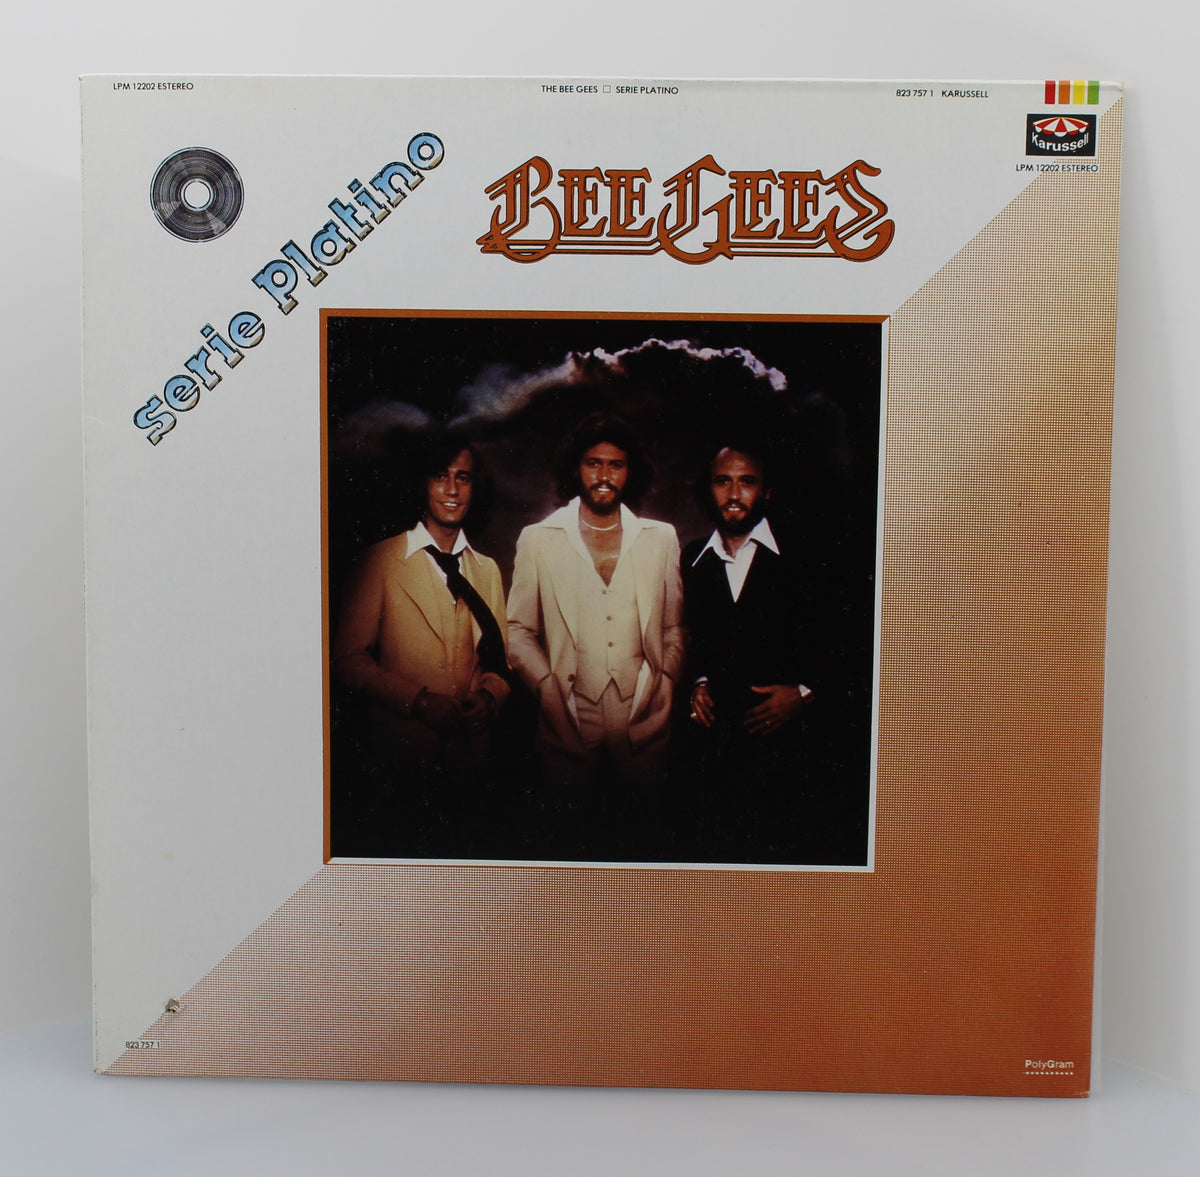 Bee Gees - Serie Platino, Vinyl, LP, Compilation, Mexico 1984